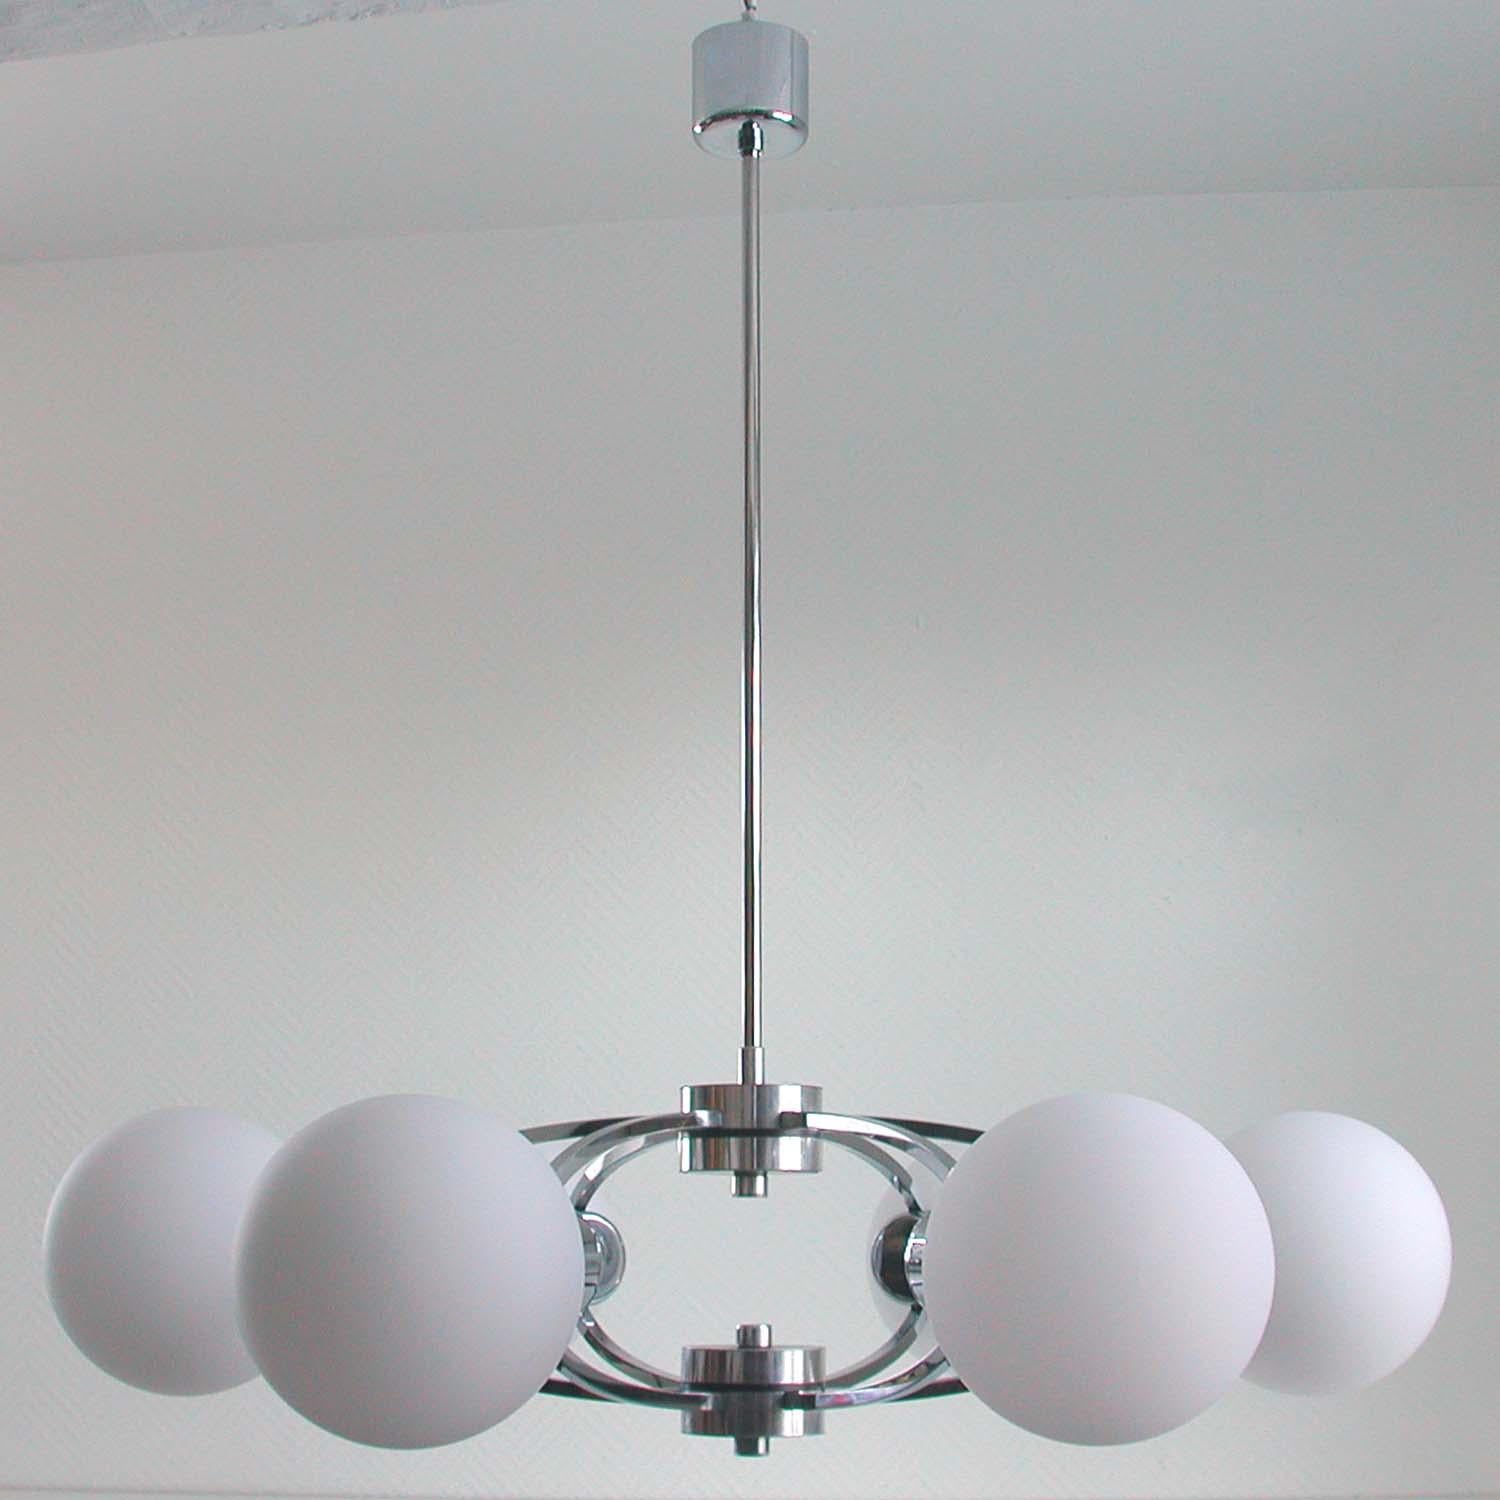 This beautiful chandelier was designed and manufactured in Germany in the 1960s. It is made of chrome-plated metal and has got six white frosted satinated glass lamp shades. Each lamp shade has got a E14 screw on socket. Diameter of each shade is